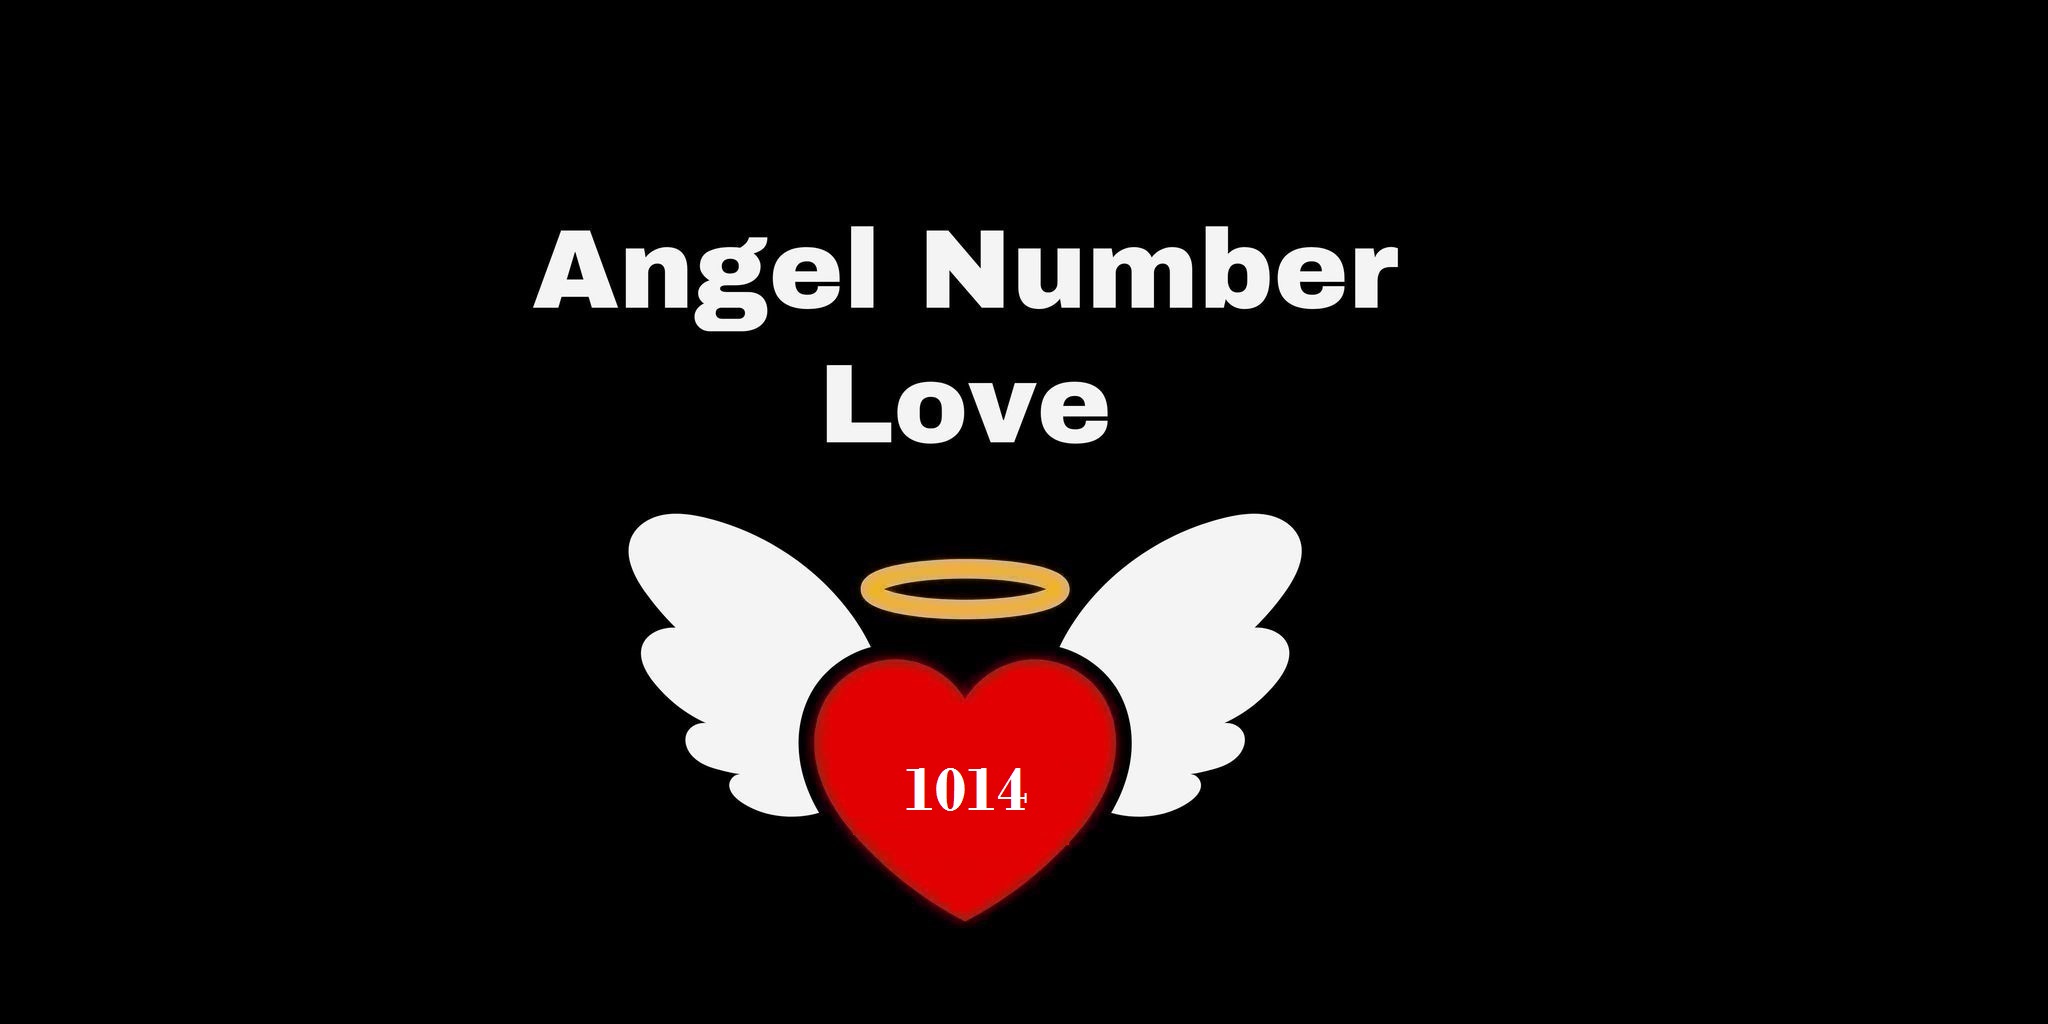 1014 Angel Number Meaning In Love